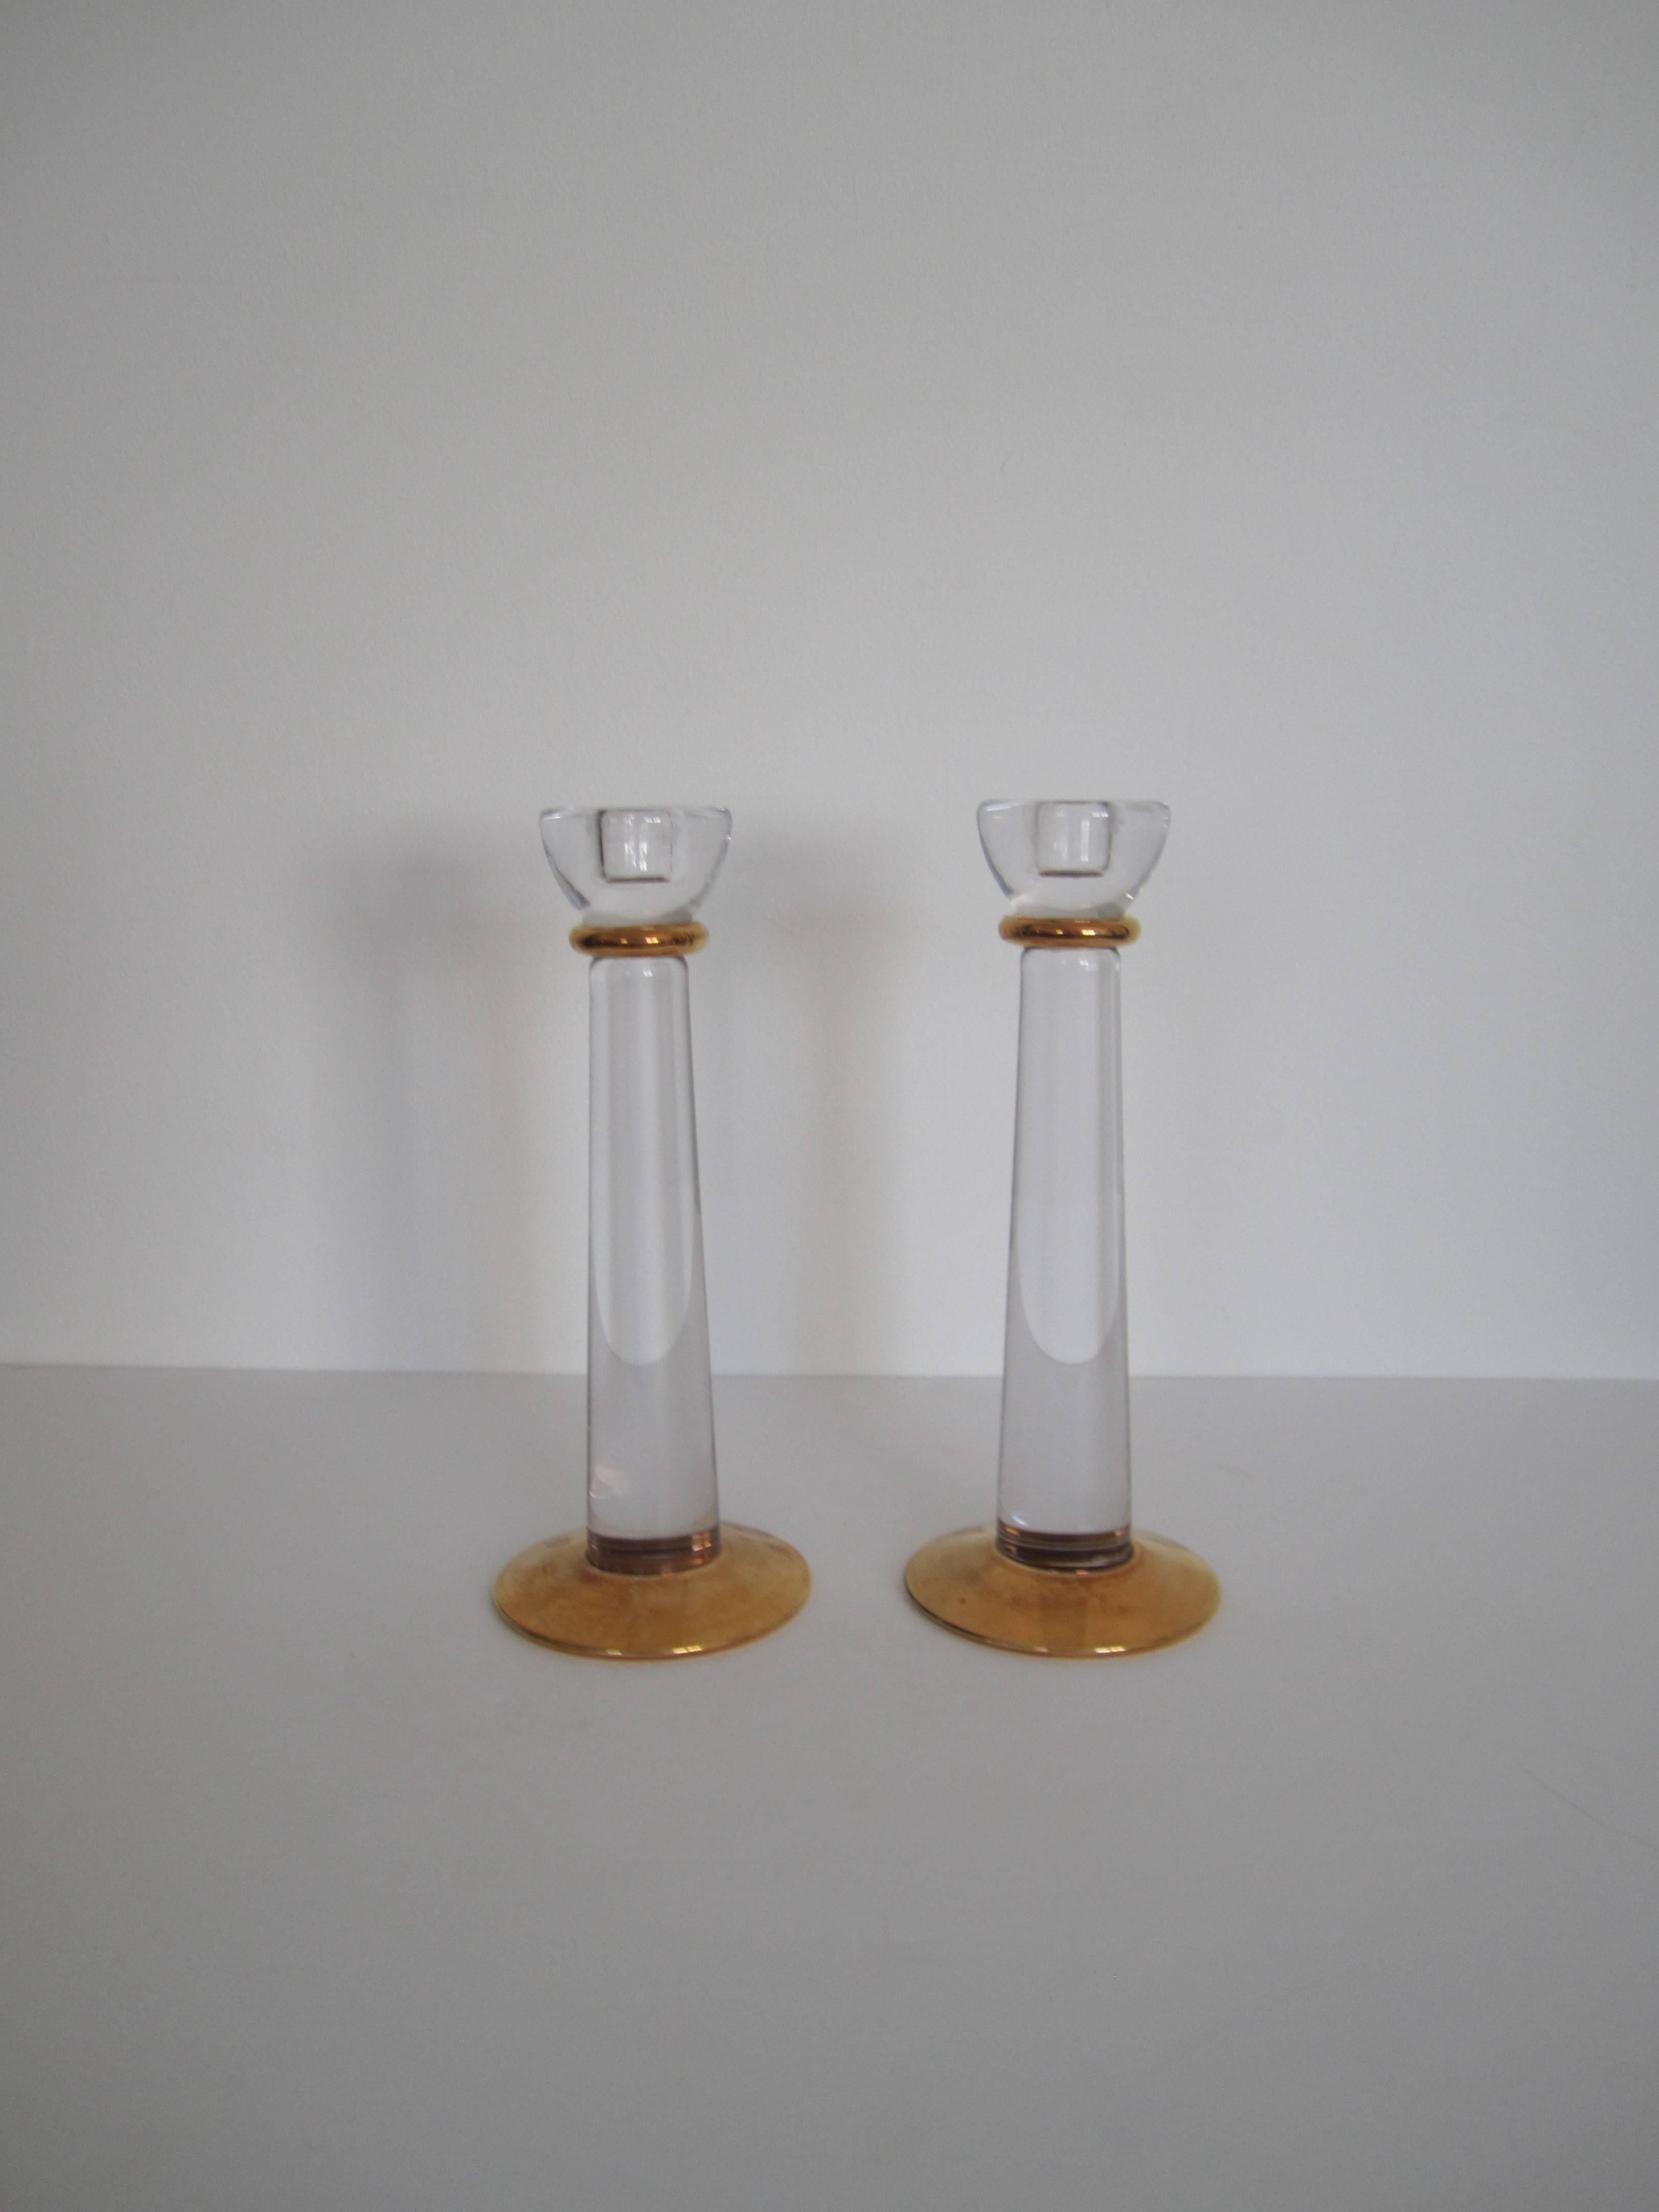 A beautiful and substantial pair of Scandinavian clear crystal and gold hand-painted candlestick holders by Kosta Boda from Sweden, circa 1990s. With maker's mark as show in image #10. 

Measurements: 10 in. H x 4 in. Diameter base

Pair available